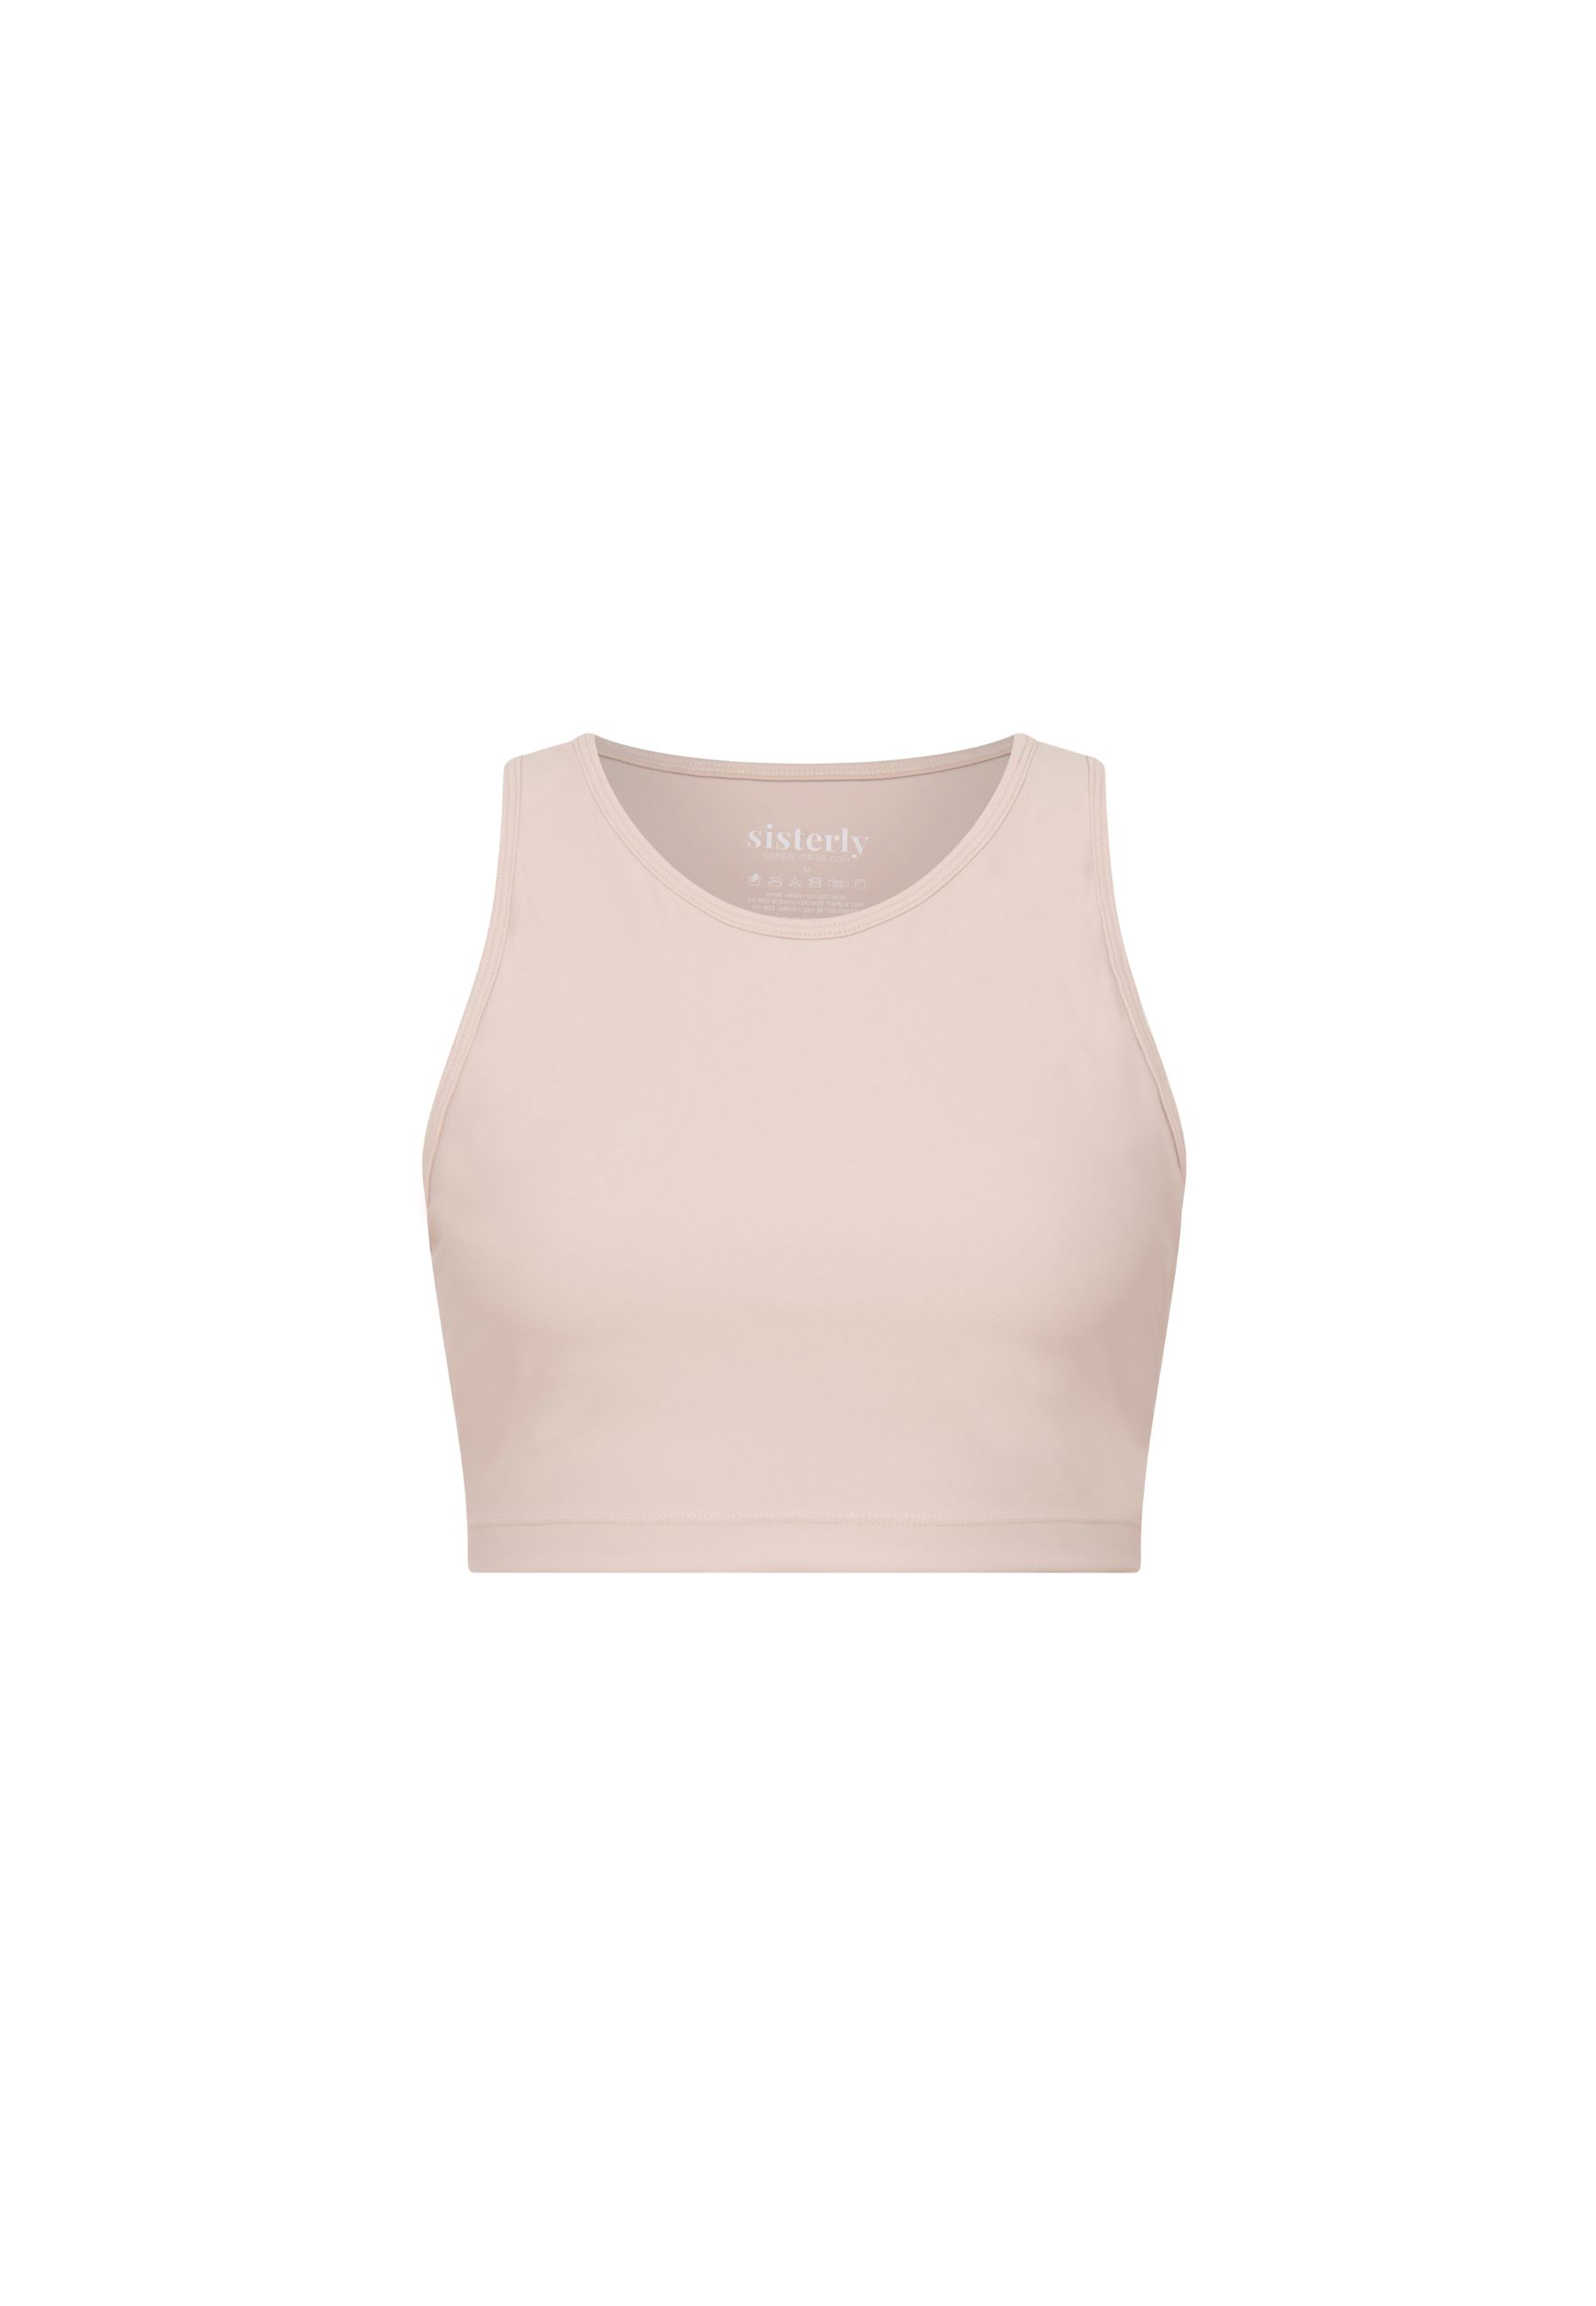 Sisterly Tribe - Midi Crop Top Cream. Light to medium support, Built-in bra & classic racer back style, Buttery Soft & light, matte fabric.